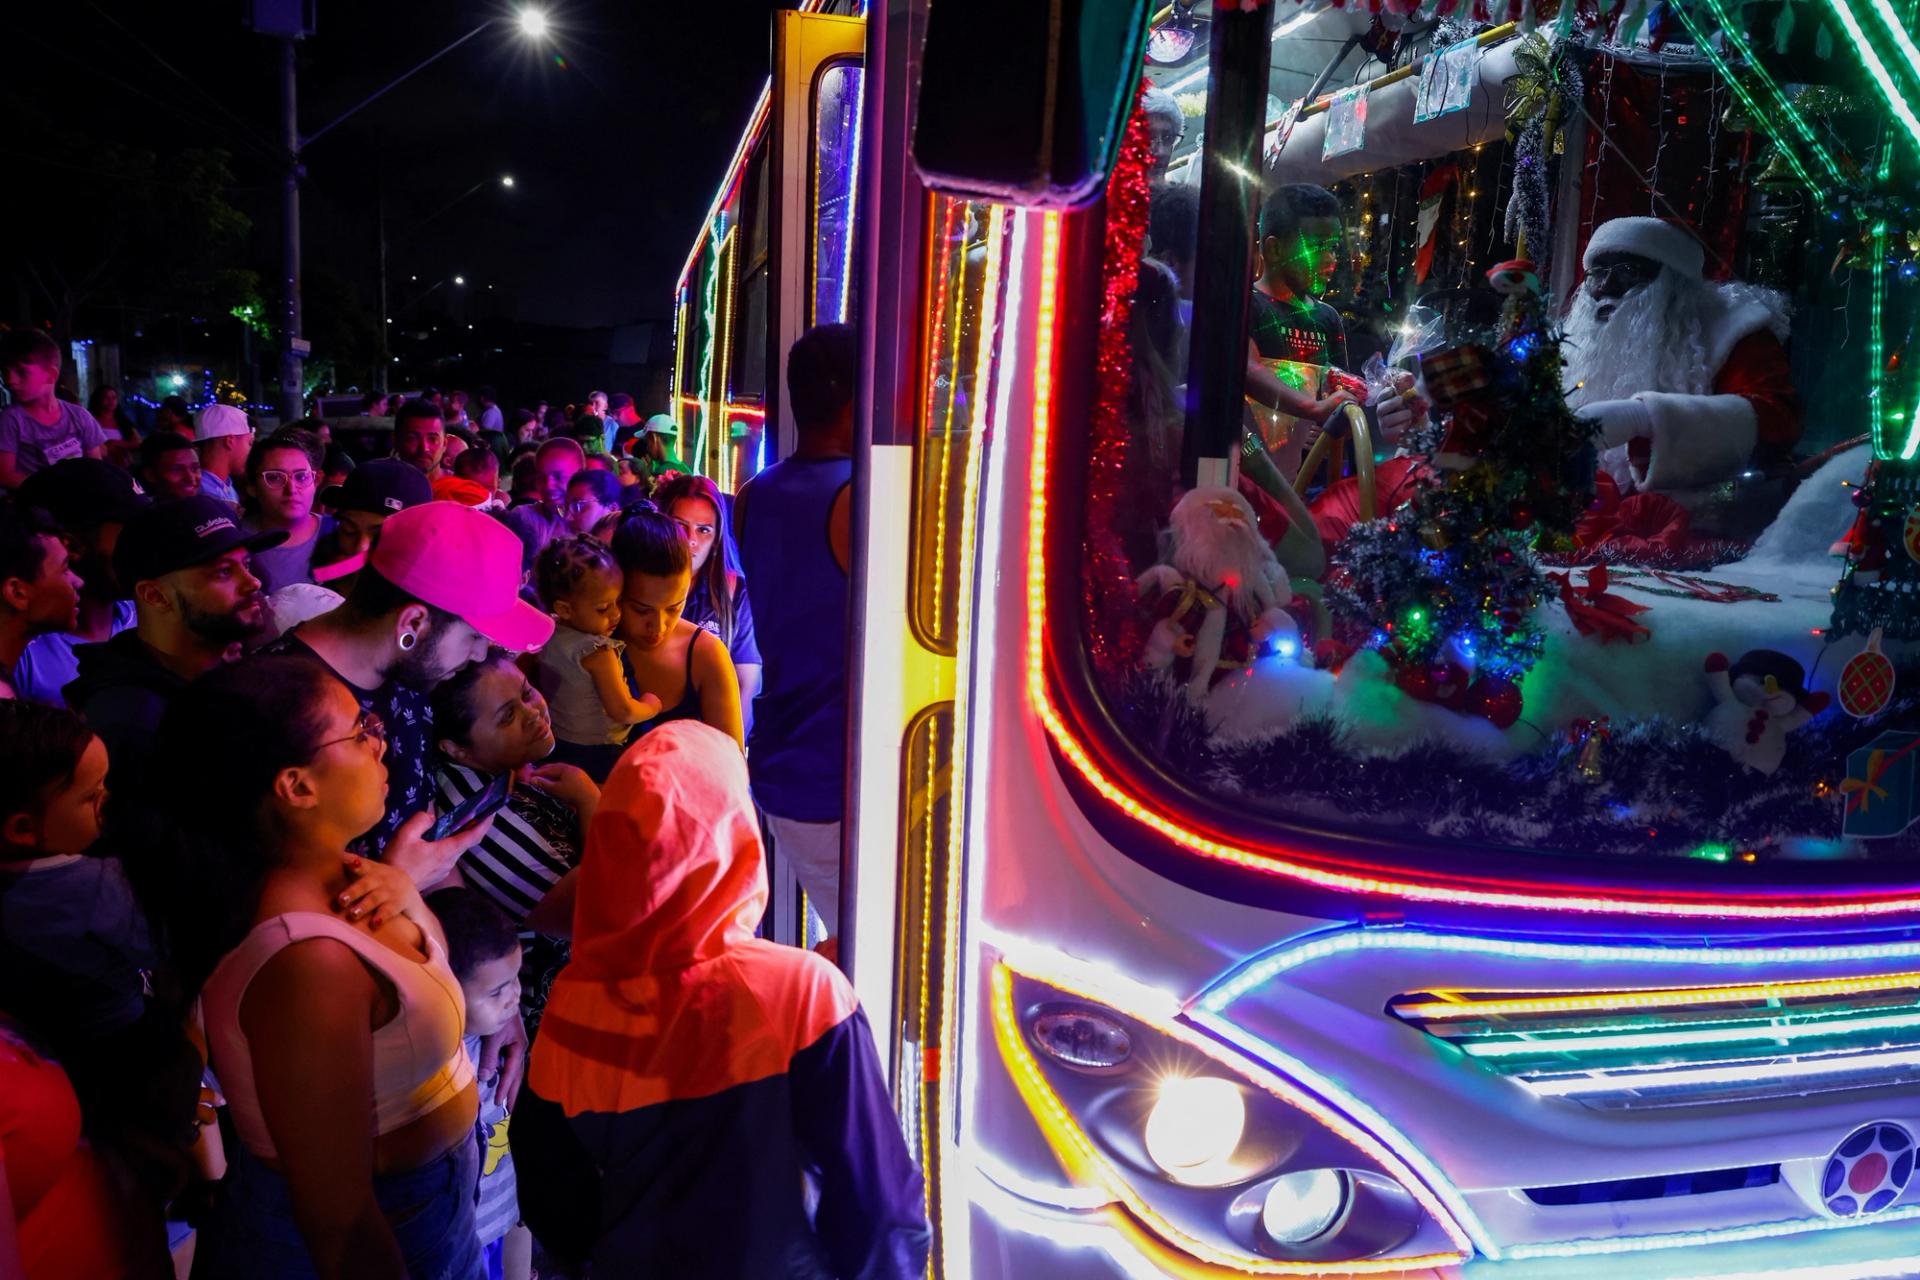 Councilman Edilson Santos, dressed as Santa Claus, drives the 'Bus Noel', a bus decorated by him and his family with Christmas ornaments, as people wait to board it at Jardim Alzira Franco, in Santo Andre, Brazil December 19, 2023.